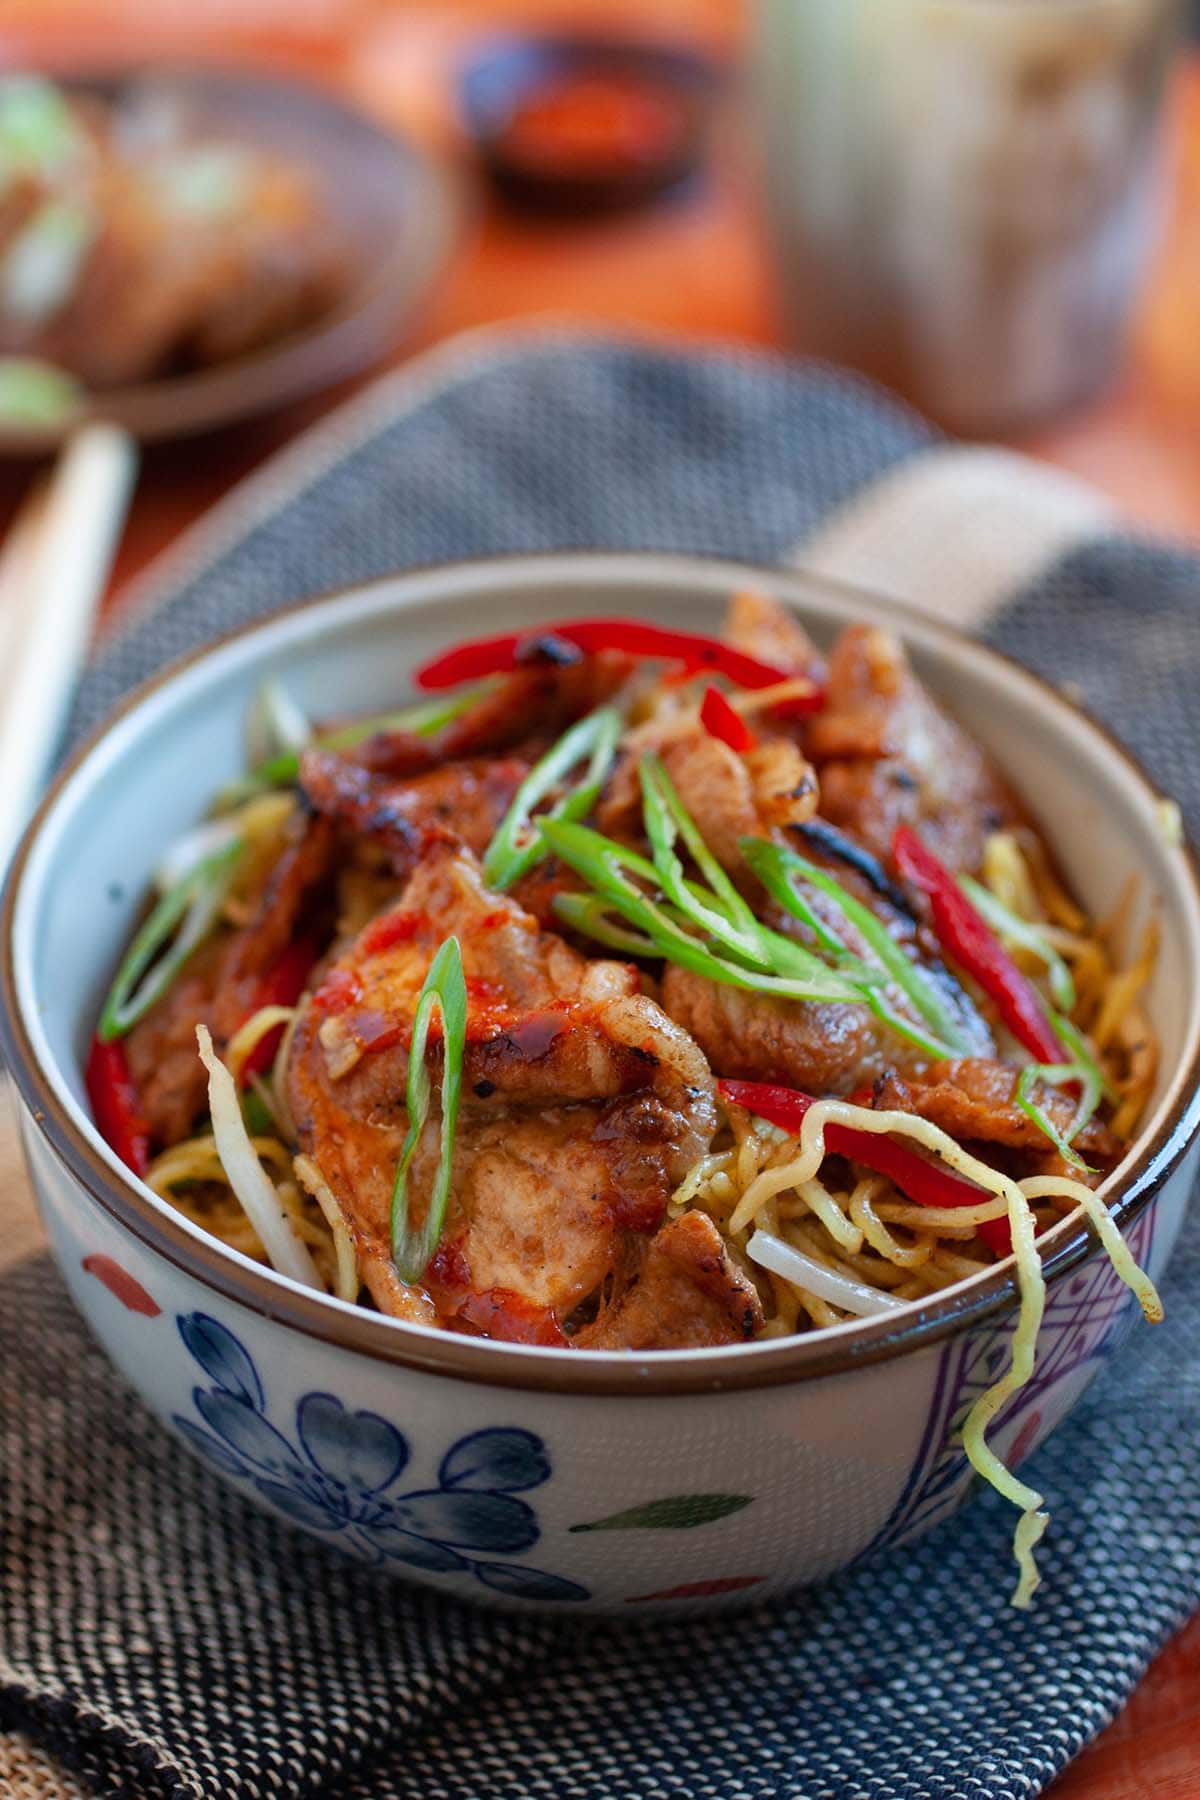 Easy Chinese sweet and sour stir fry pork noodles.